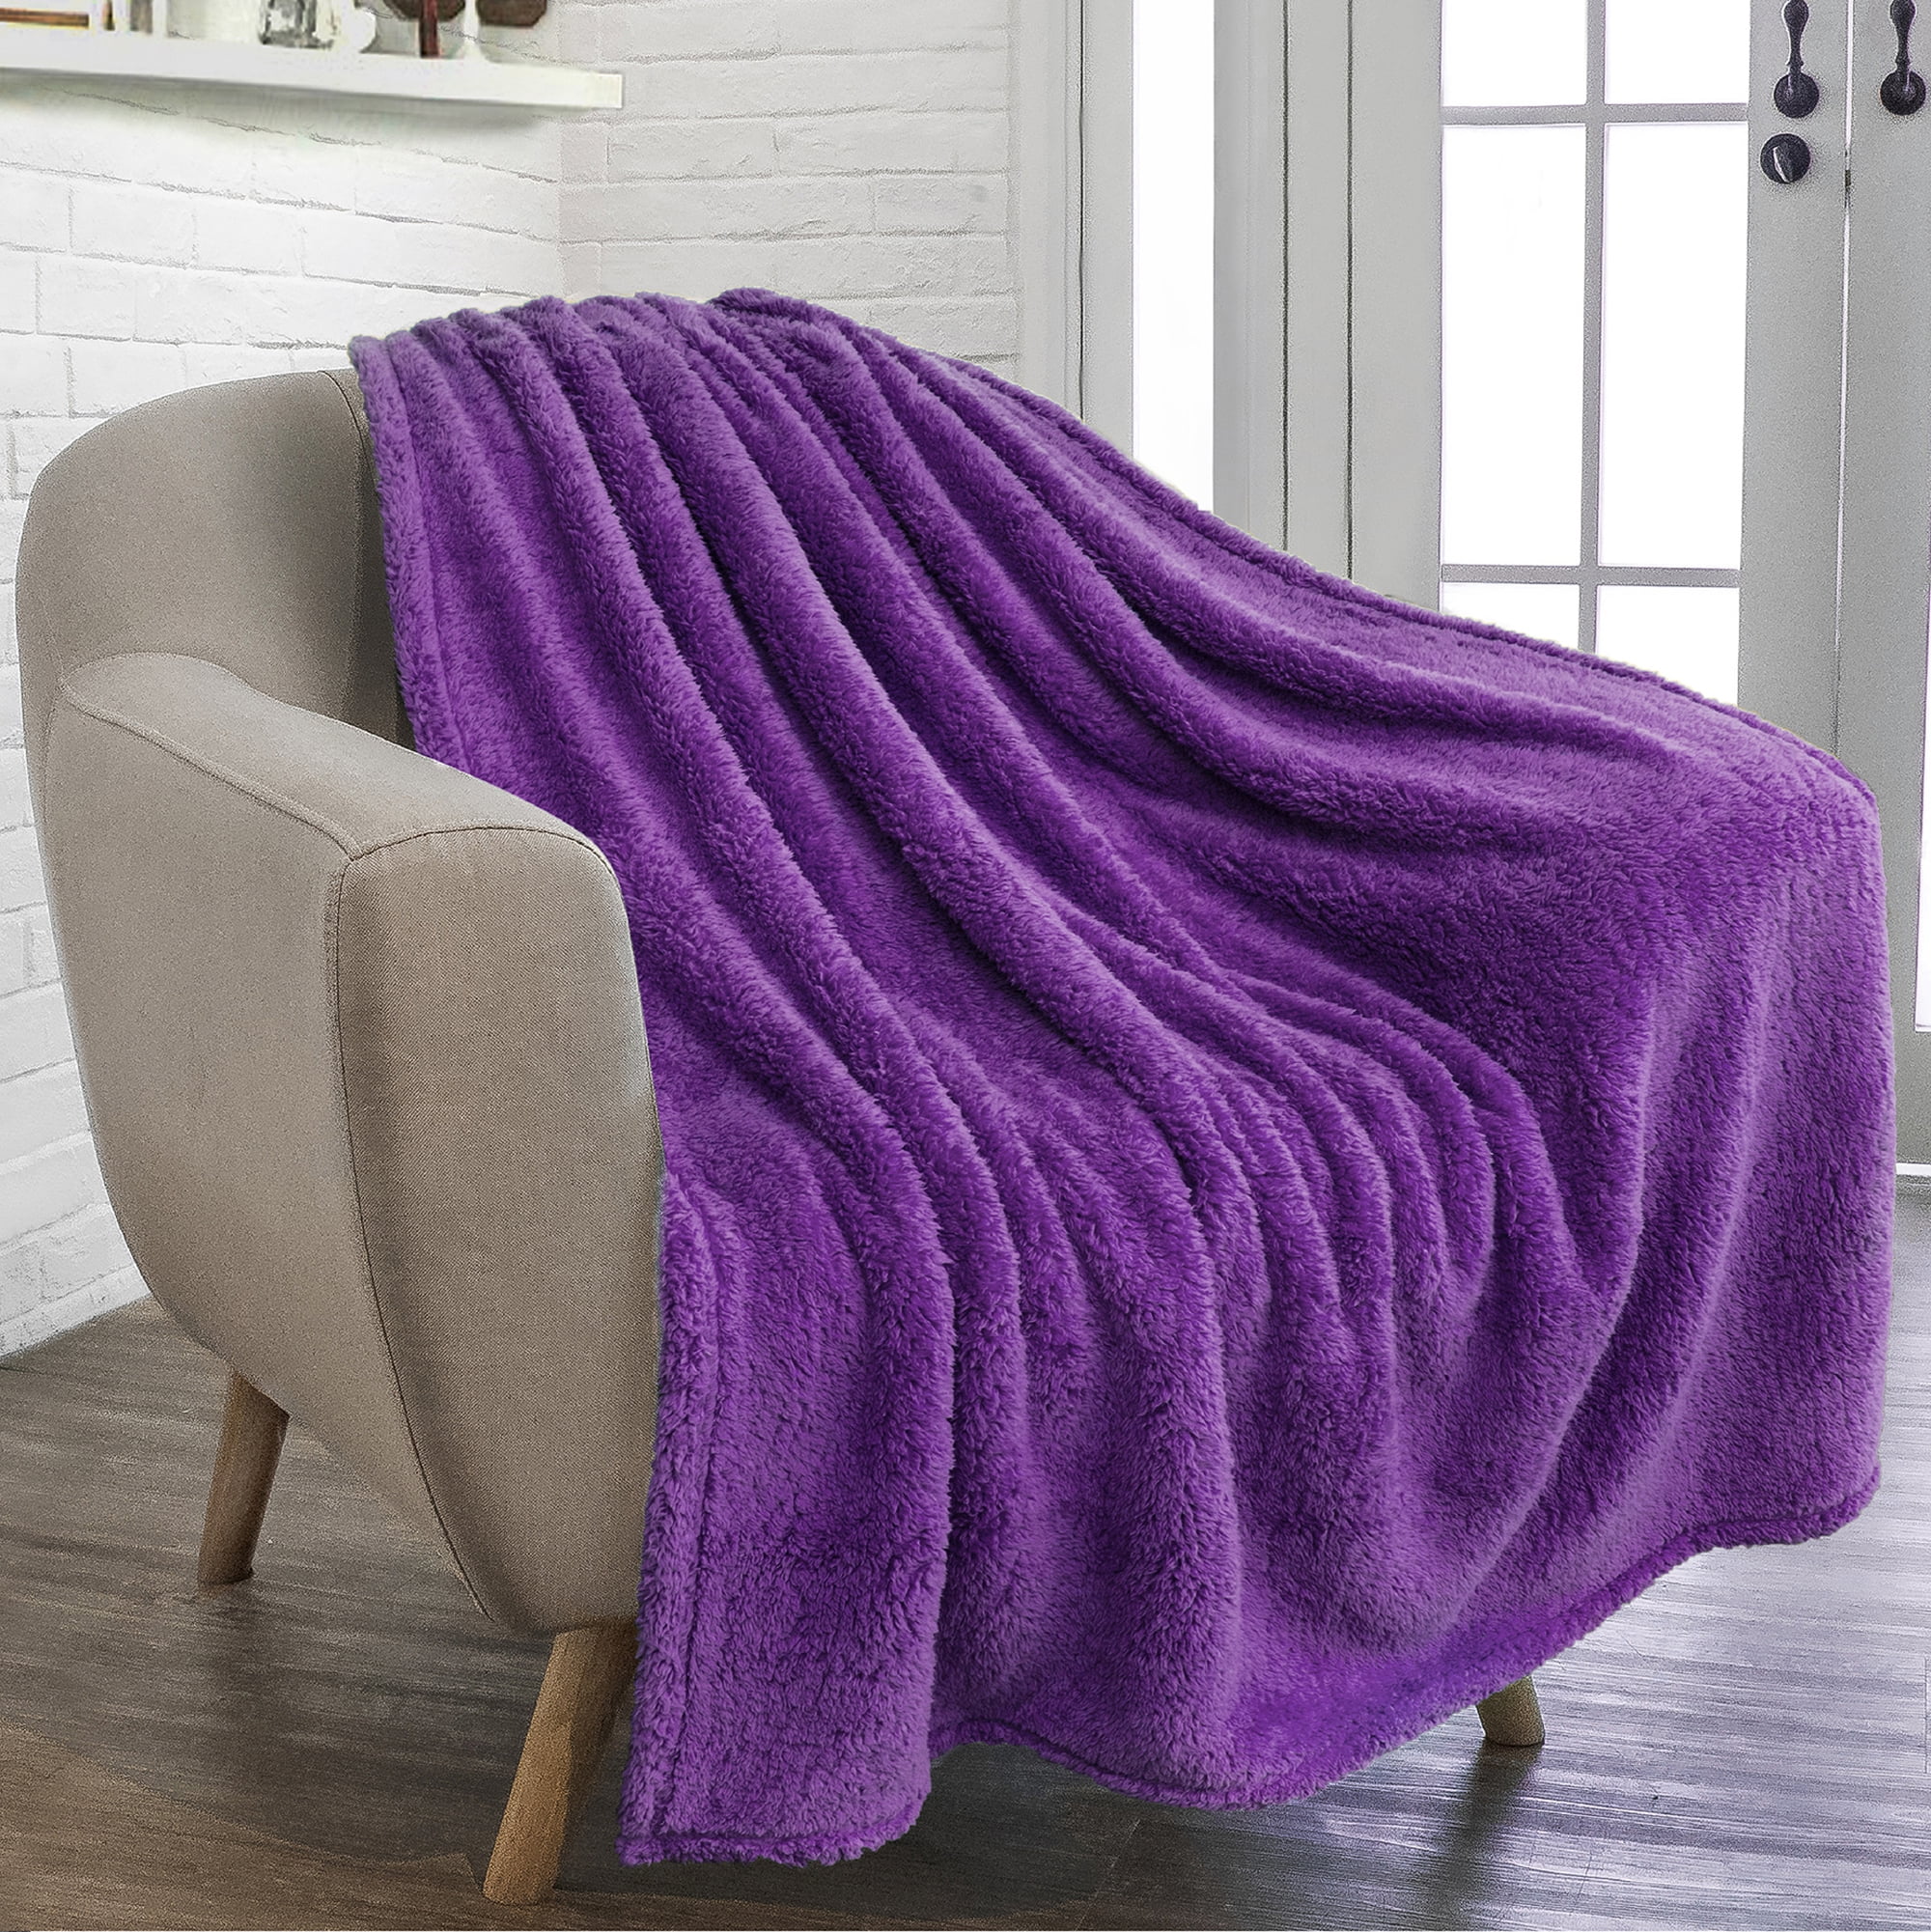 Lush Blanket Soft Cosy Warm Cuddly Sofa Bed Throws Doube King Size Hug and Snug 